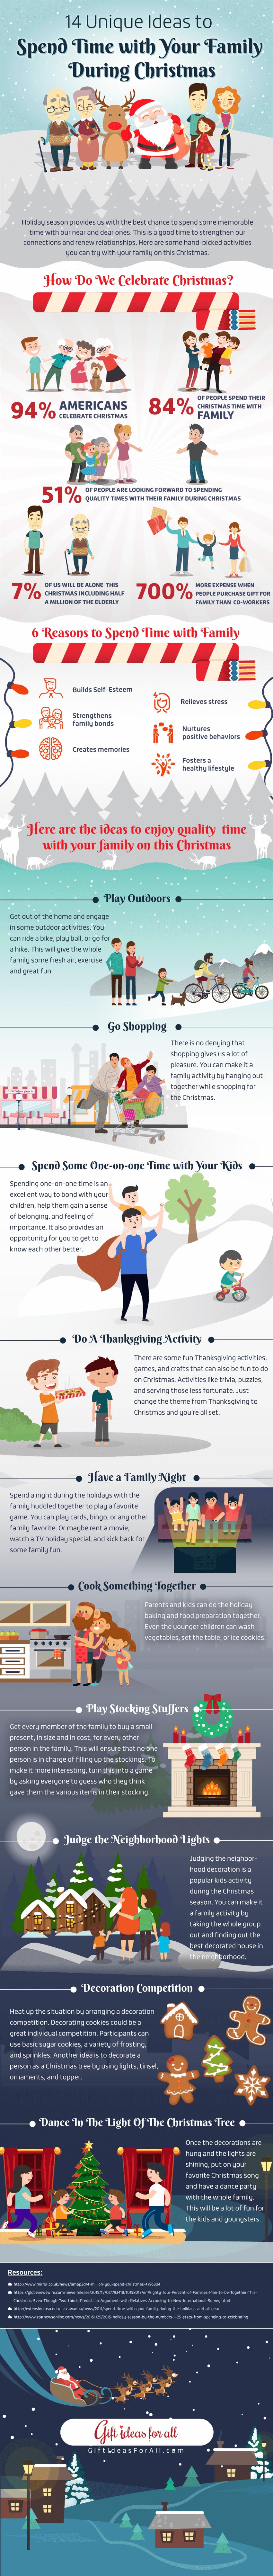 14 Unique Ideas to Spend Time With Family During Christmas